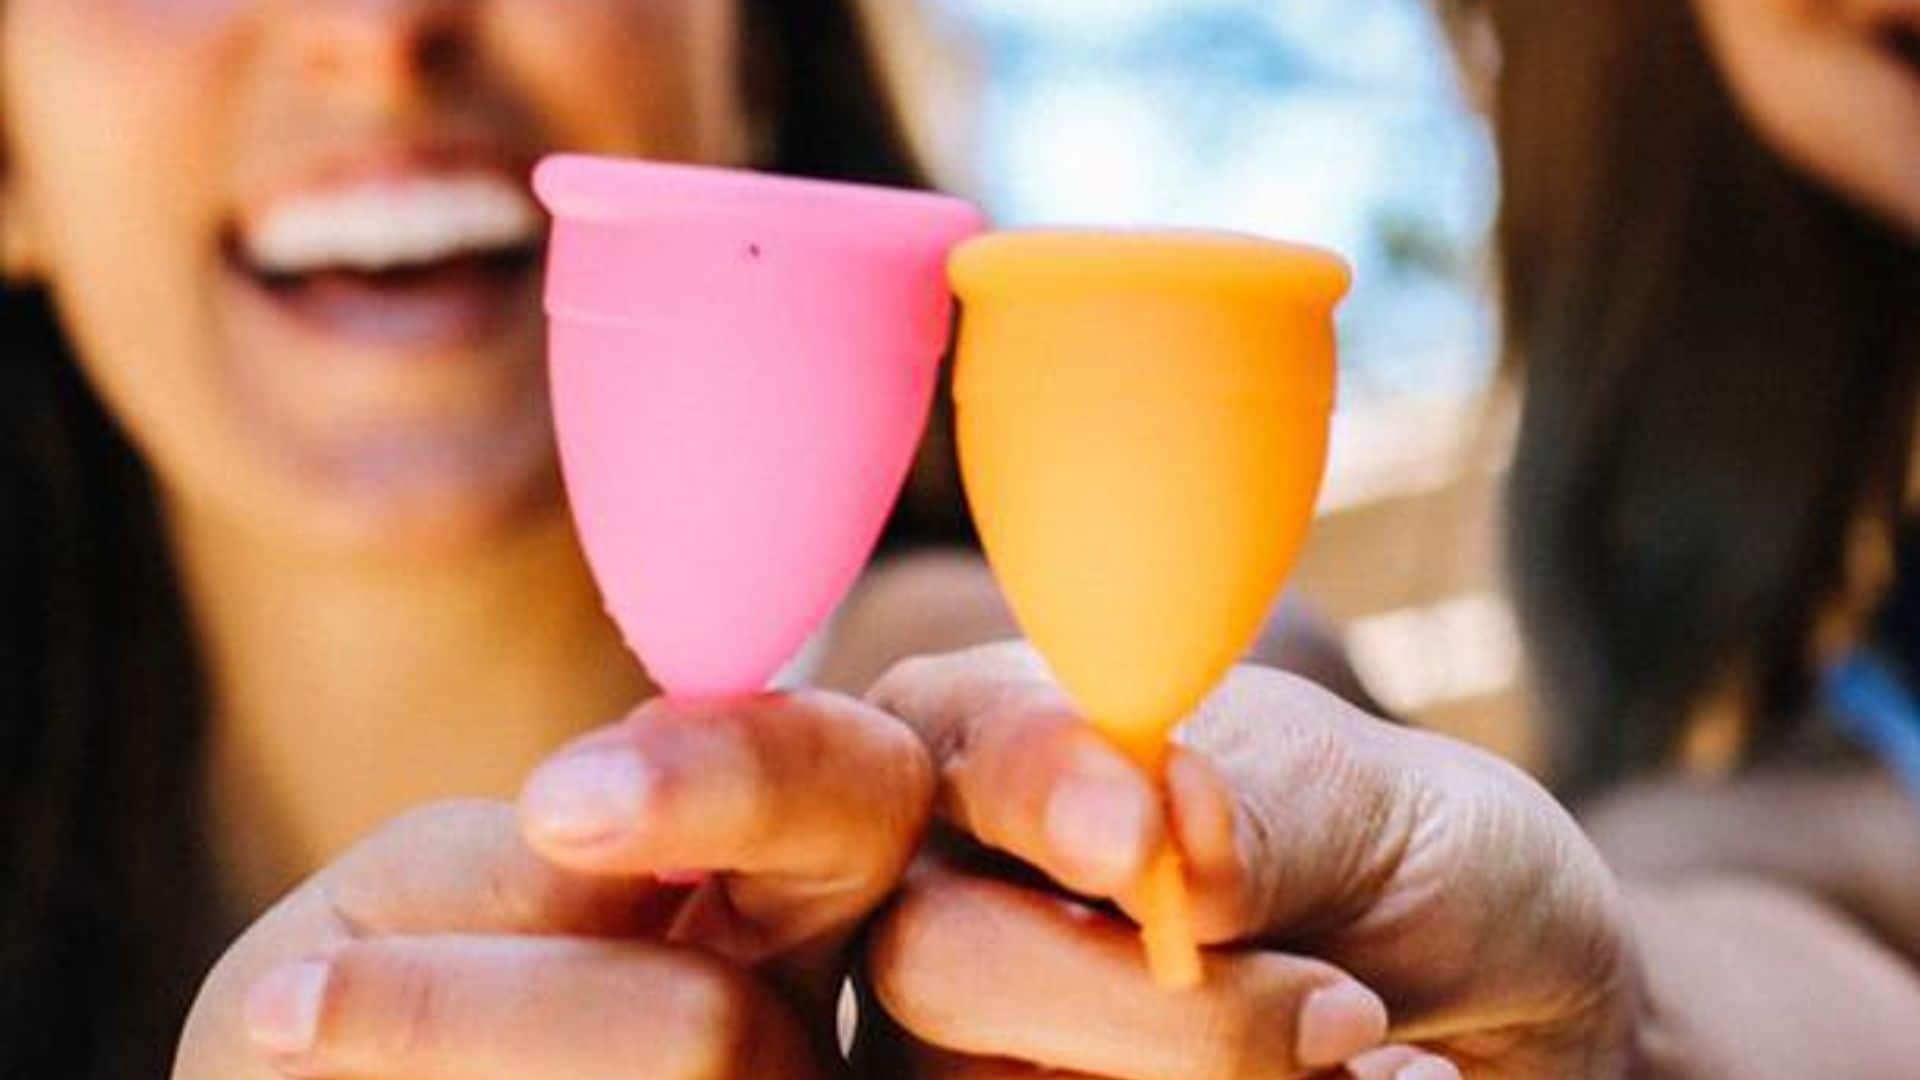 What are menstrual cups? The plastic-free feminine product that will save the planet